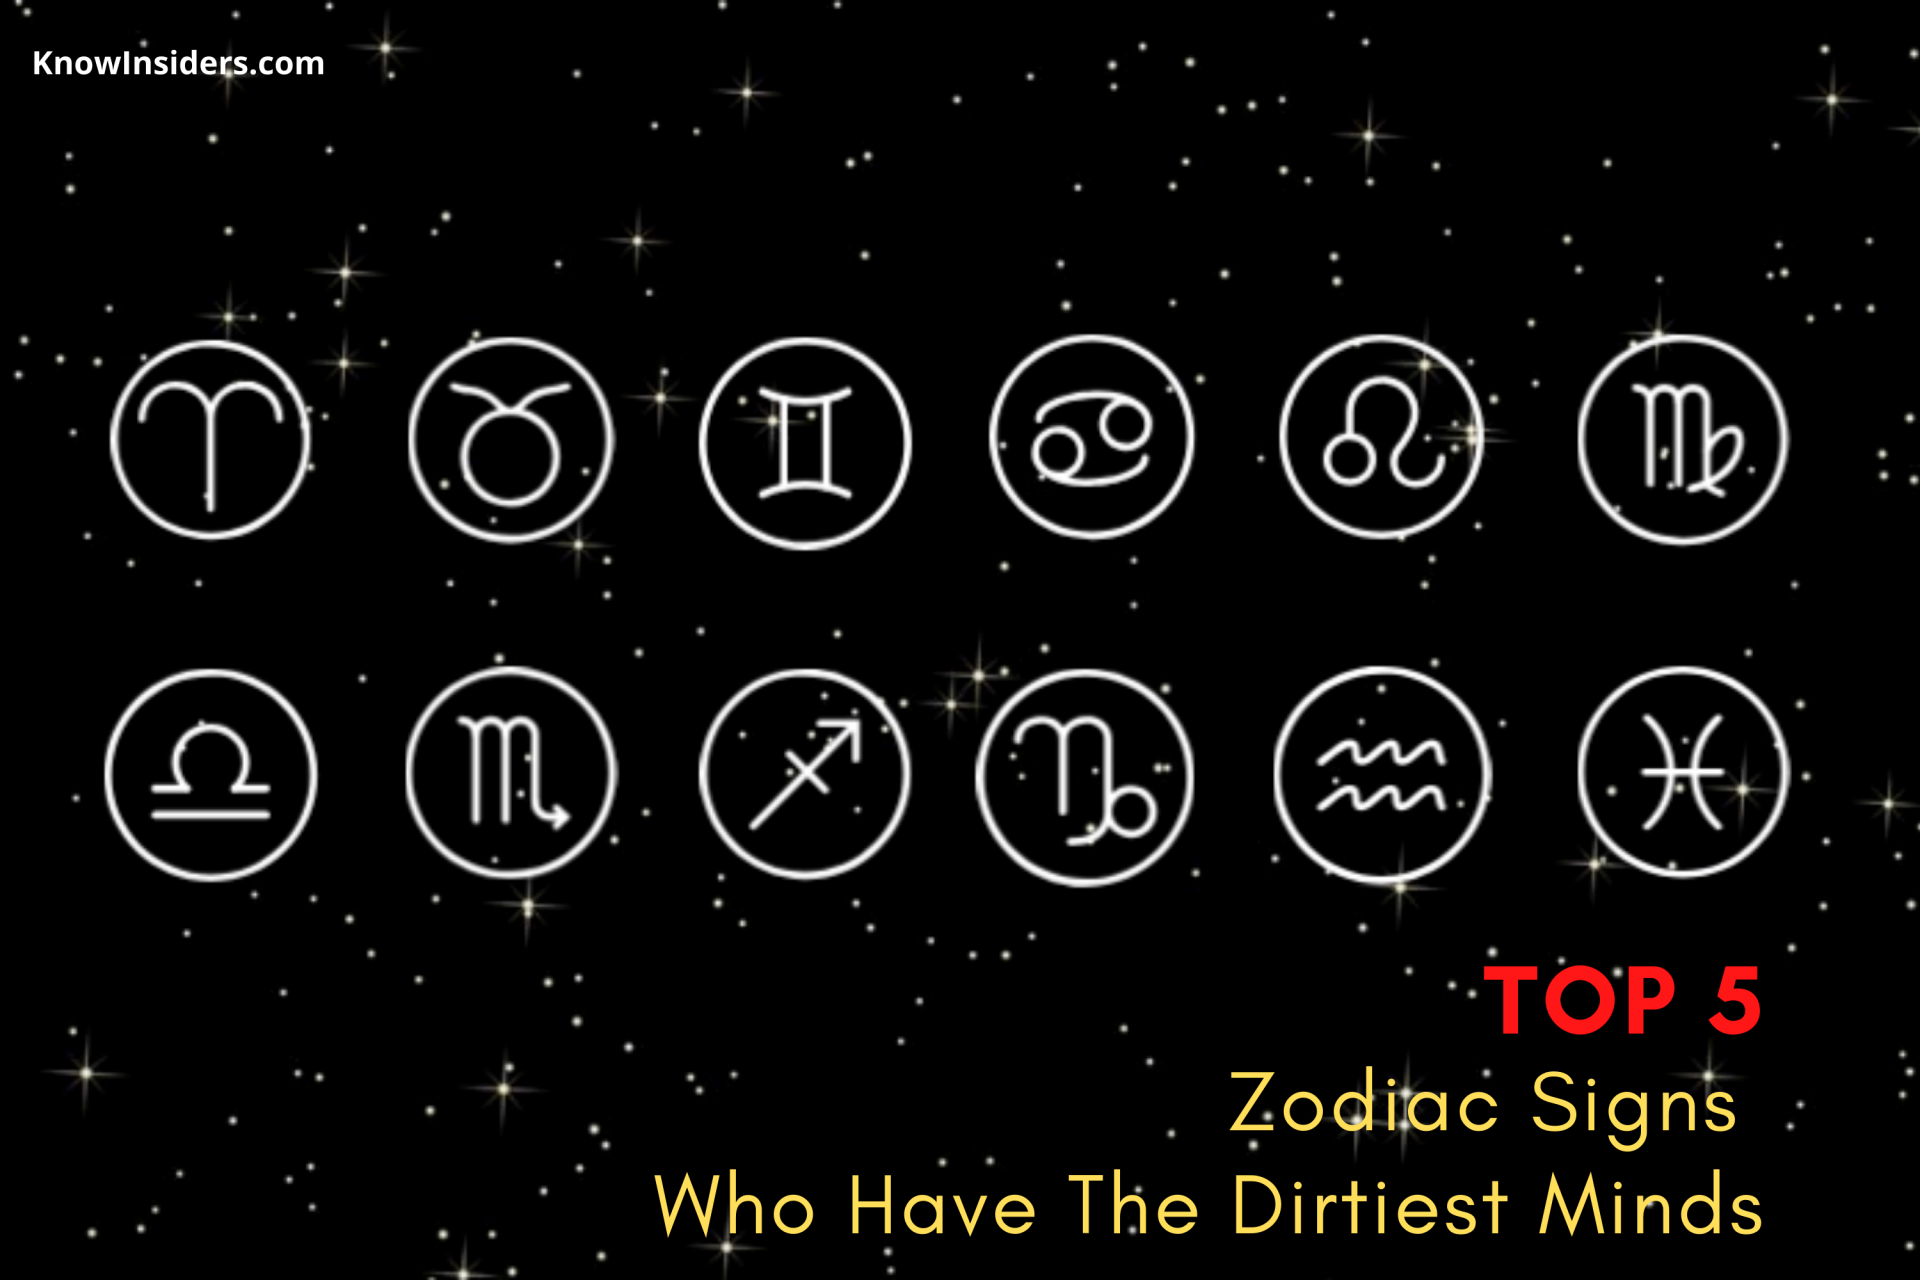 Top 5 Pervert Zodiac Signs Who Have The Dirtiest Minds